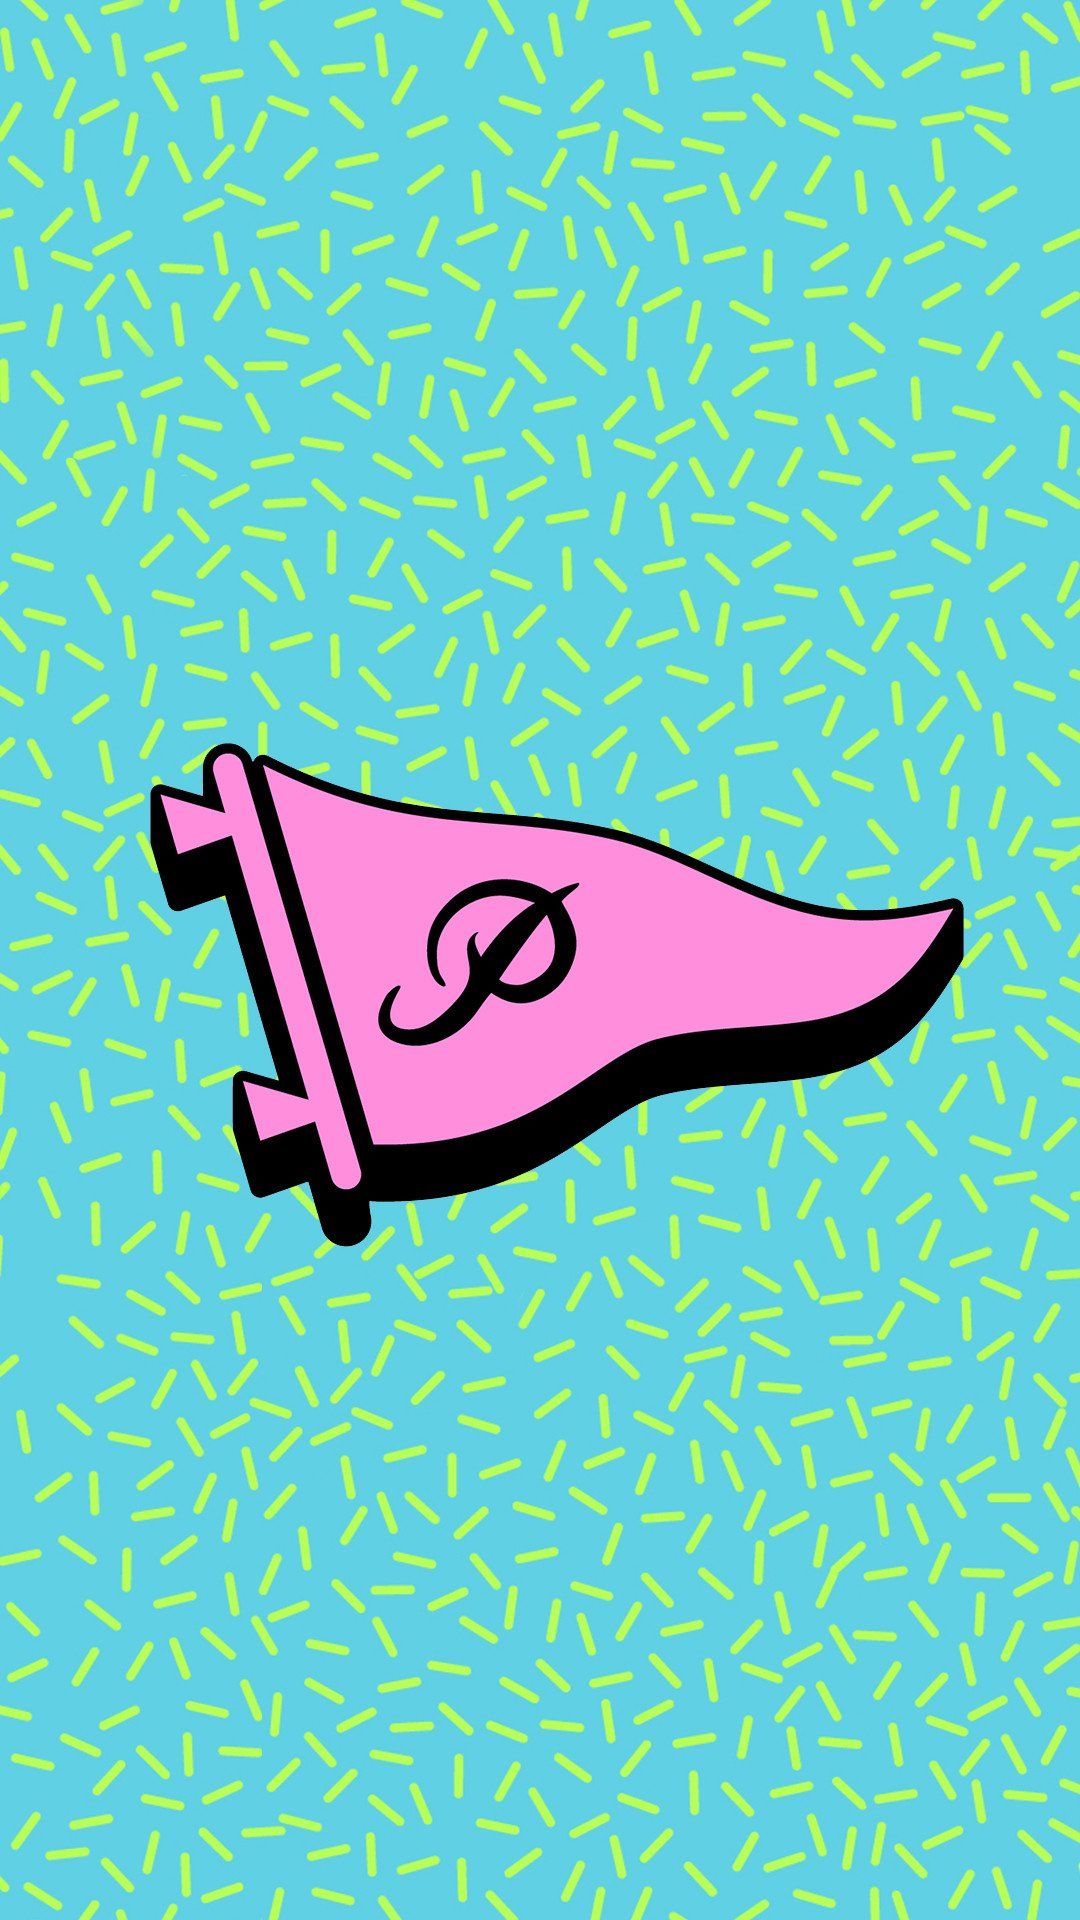 A pink flag with a black outline and a black line with a loop in the middle flies on a blue background with yellow and white sprinkles. - Skate